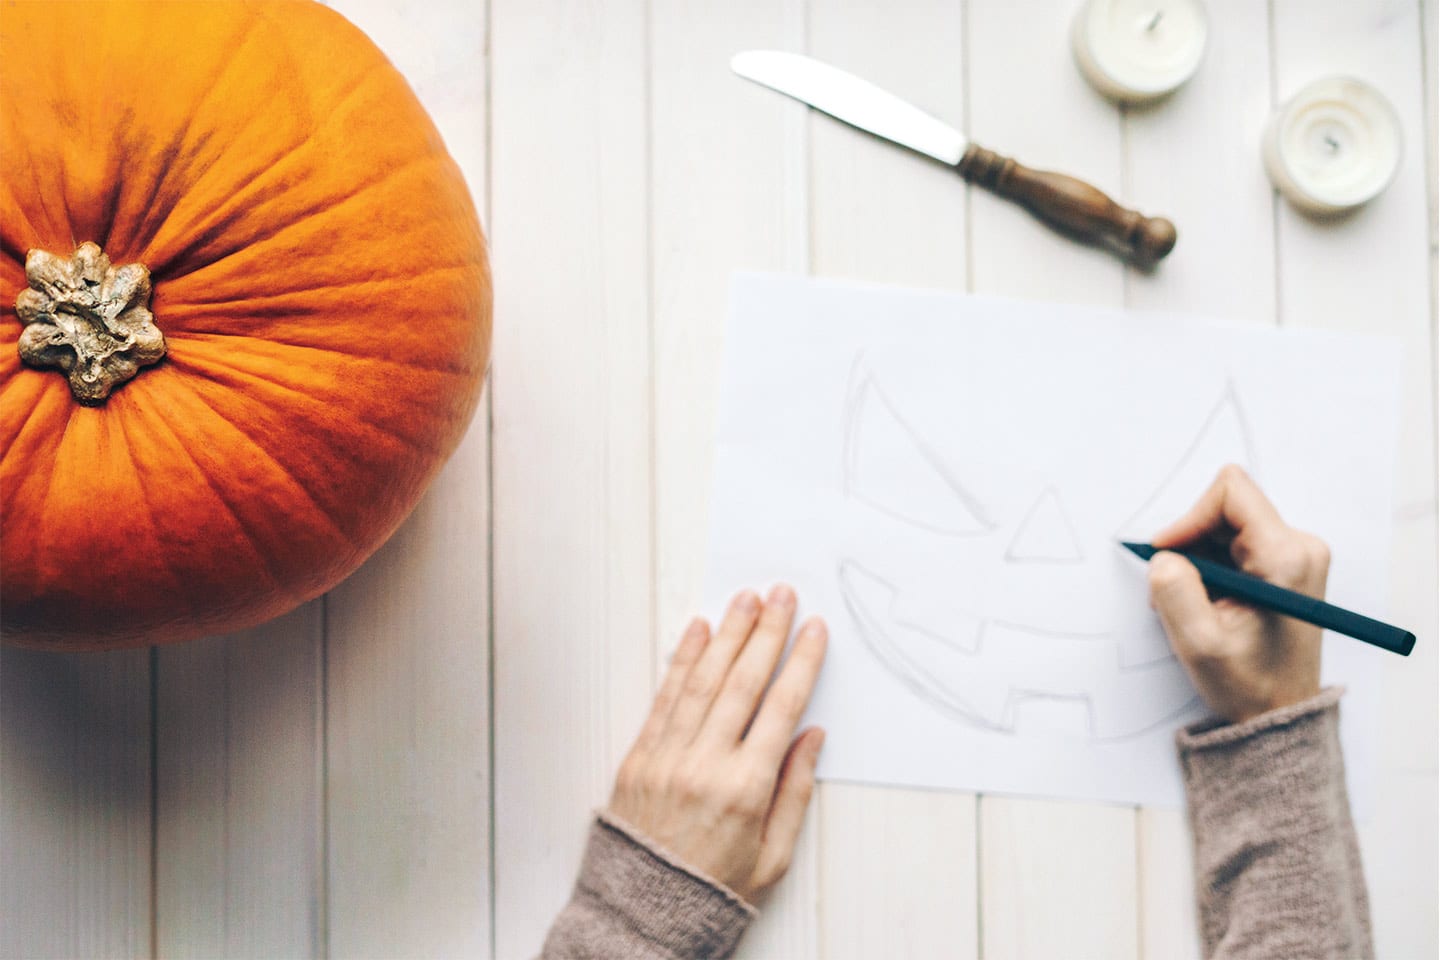 hands tracing a template for carving a jack-o-lantern pumpkin for halloween